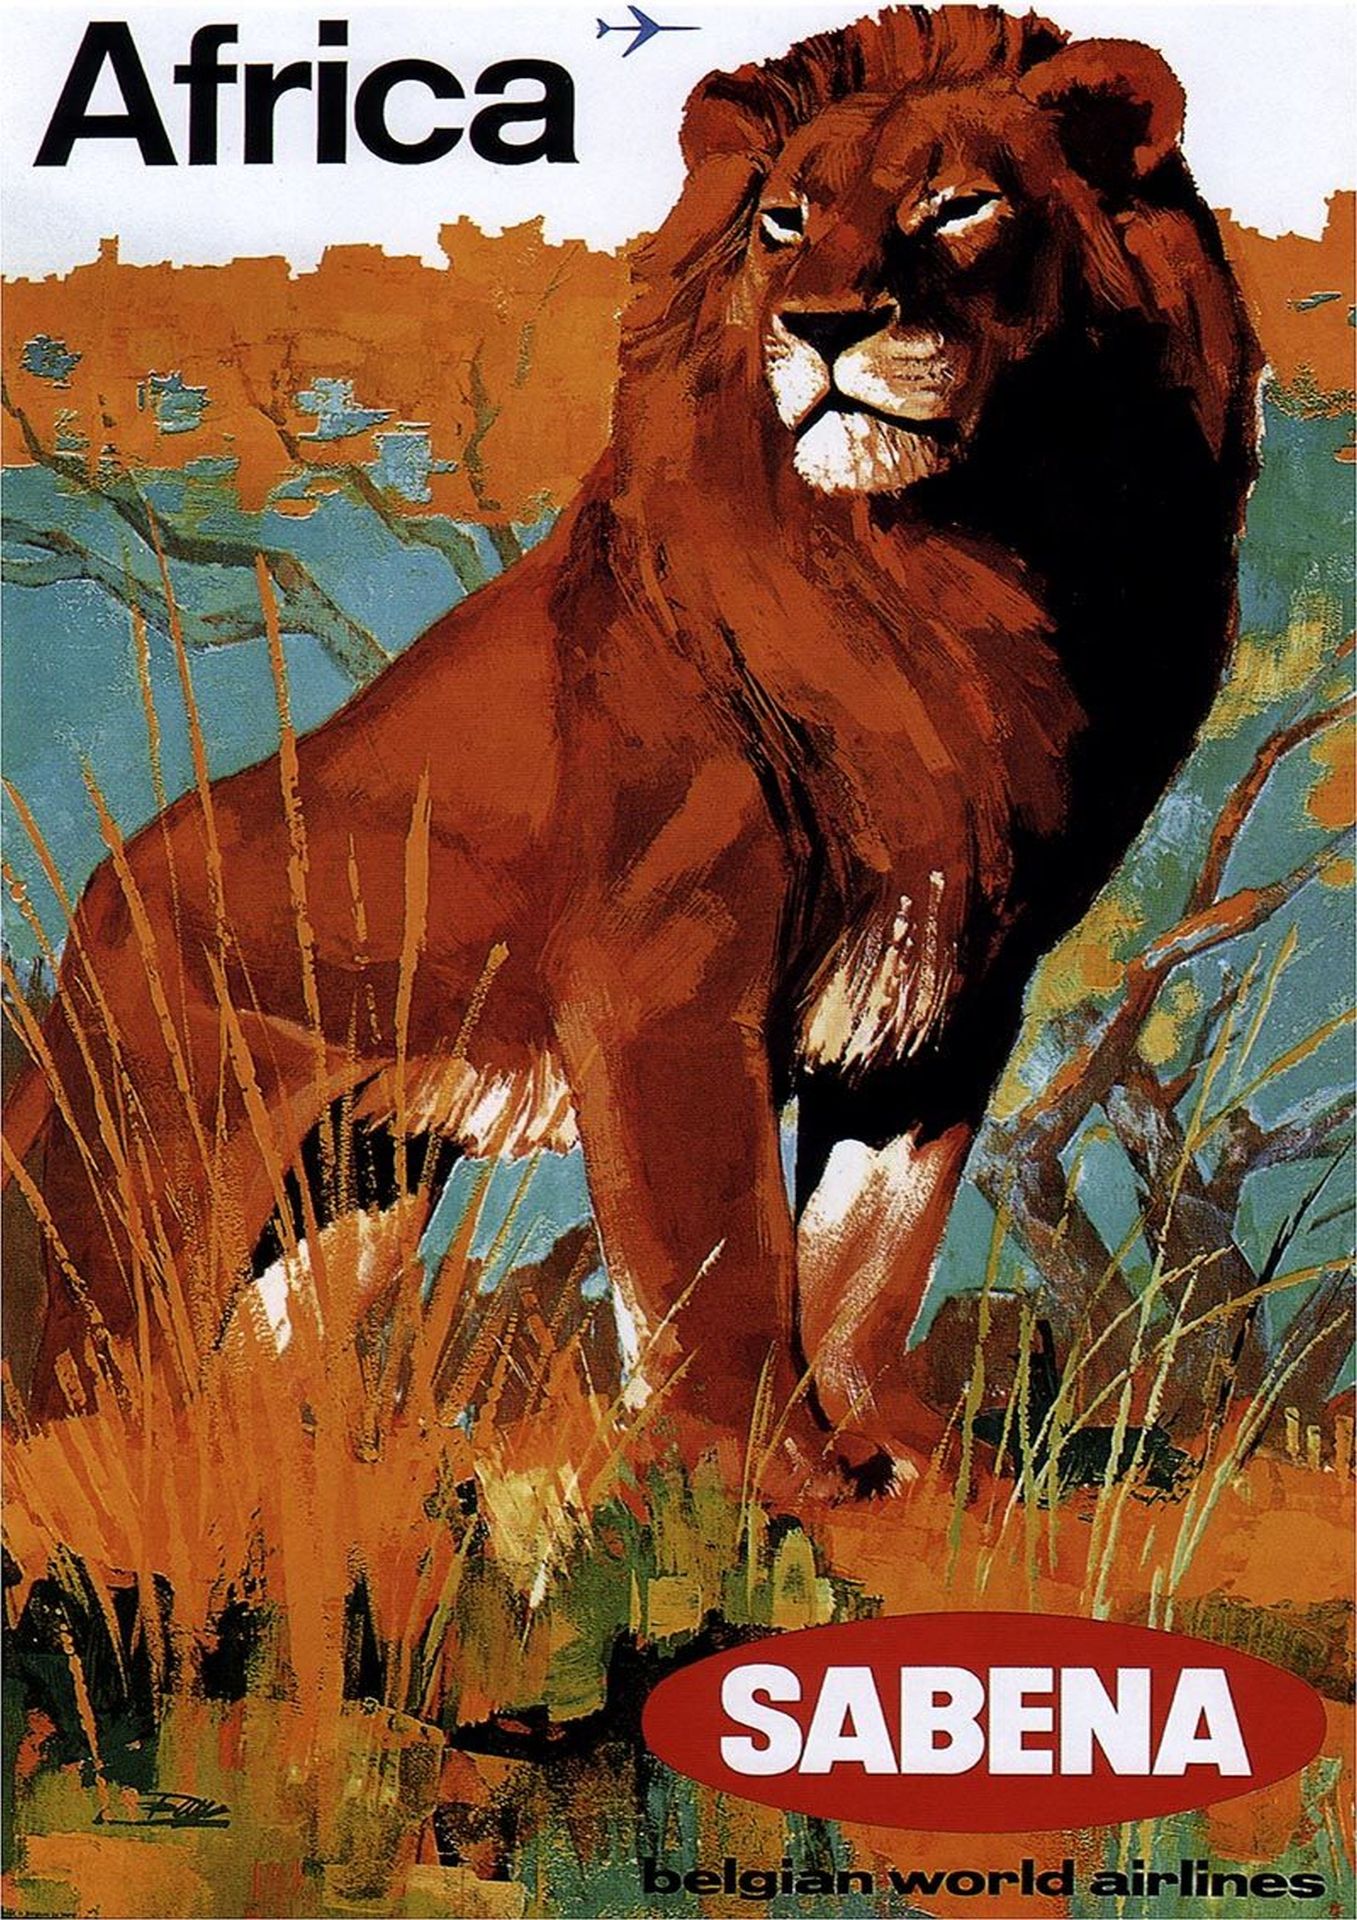 Belgian World Airlines, Africa Travel Poster